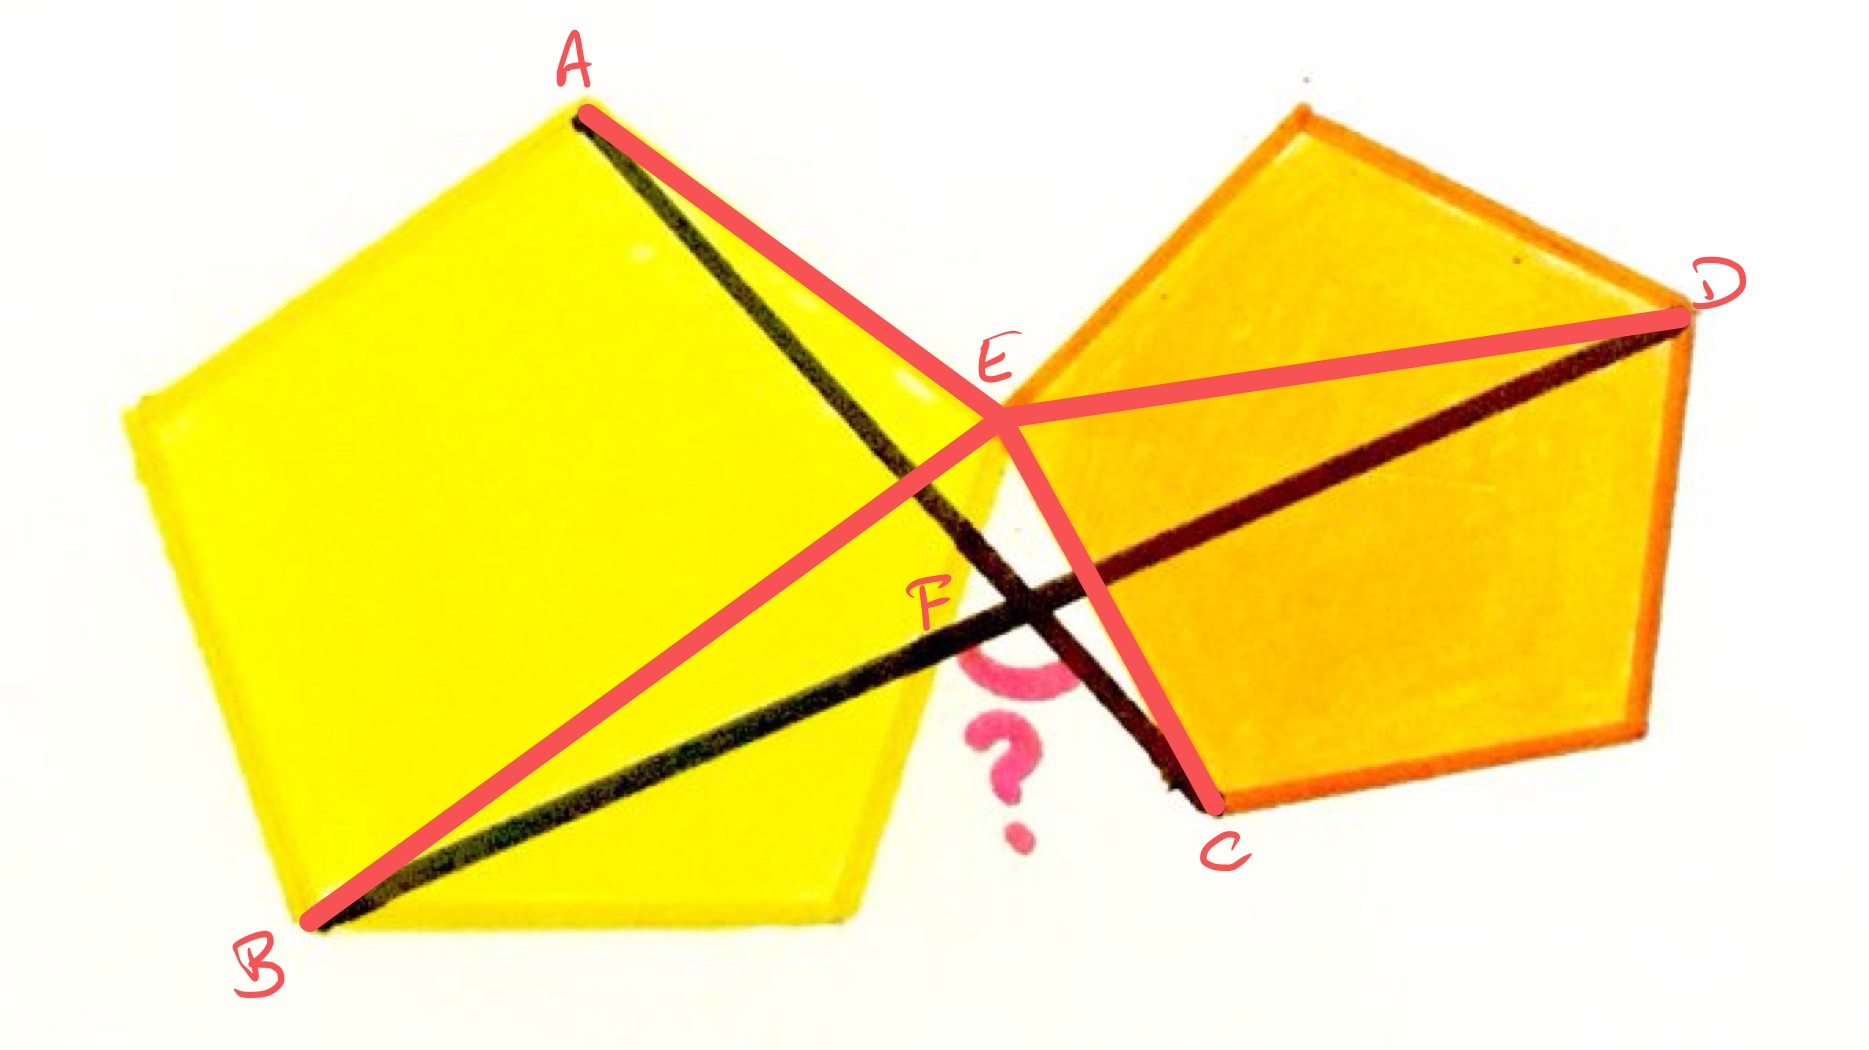 Two pentagons labelled